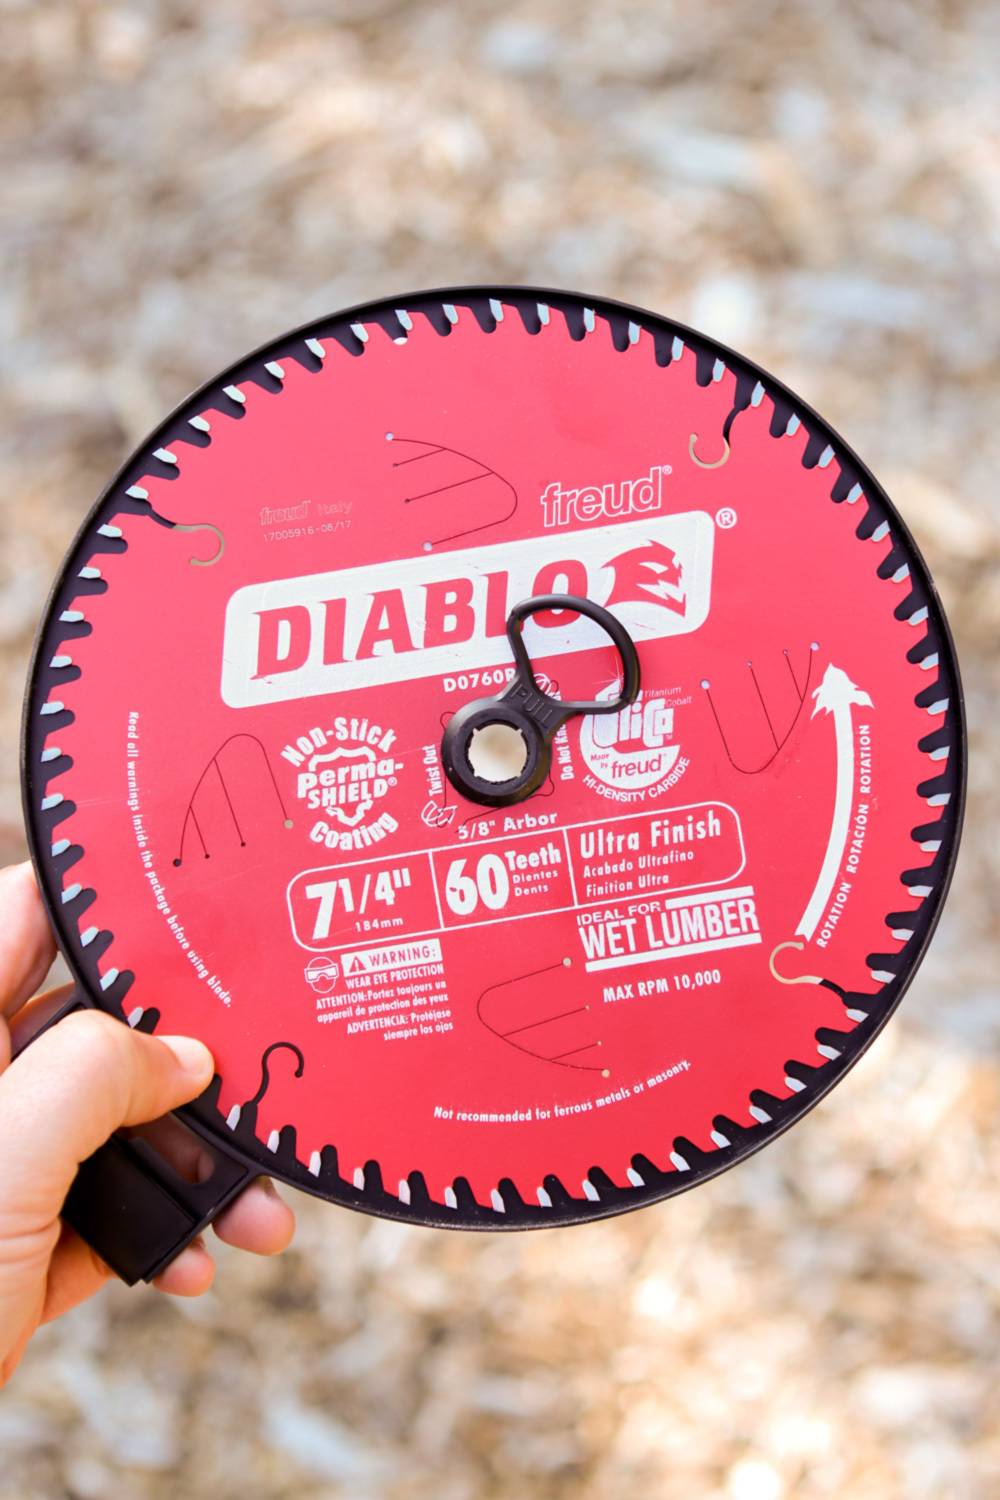 How to Use a Circular Saw: Why you should buy a separate blade